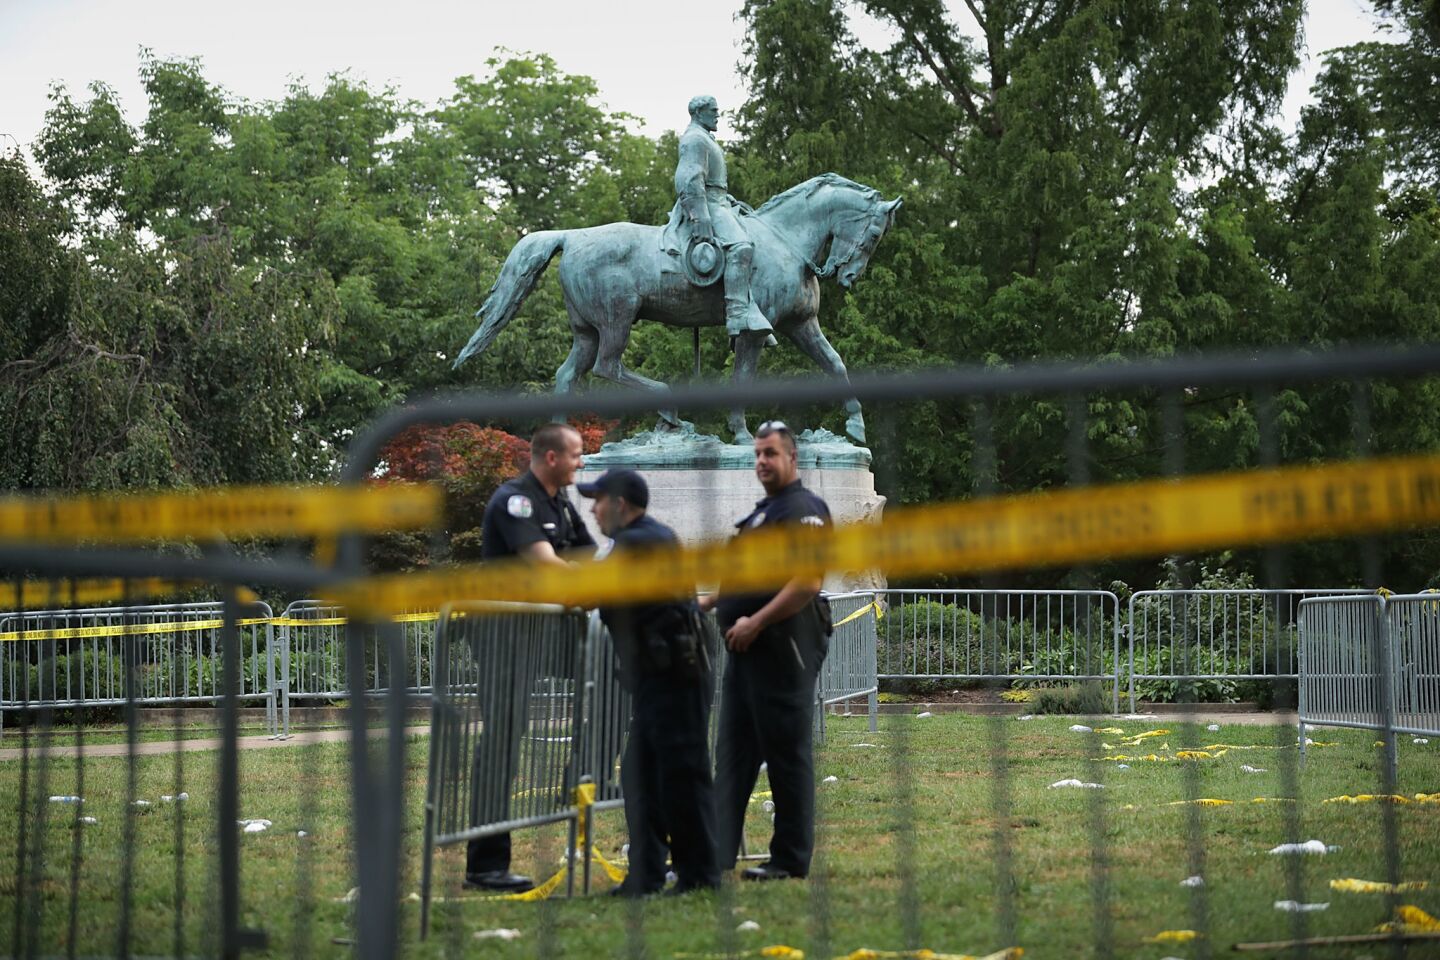 Police stand watch Sunday near the statue of Confederate Gen. Robert E. Lee in the center of Emancipation Park in Charlottesville, Va. White nationalists rallied in the city in part to protest the pending removal of the statue.